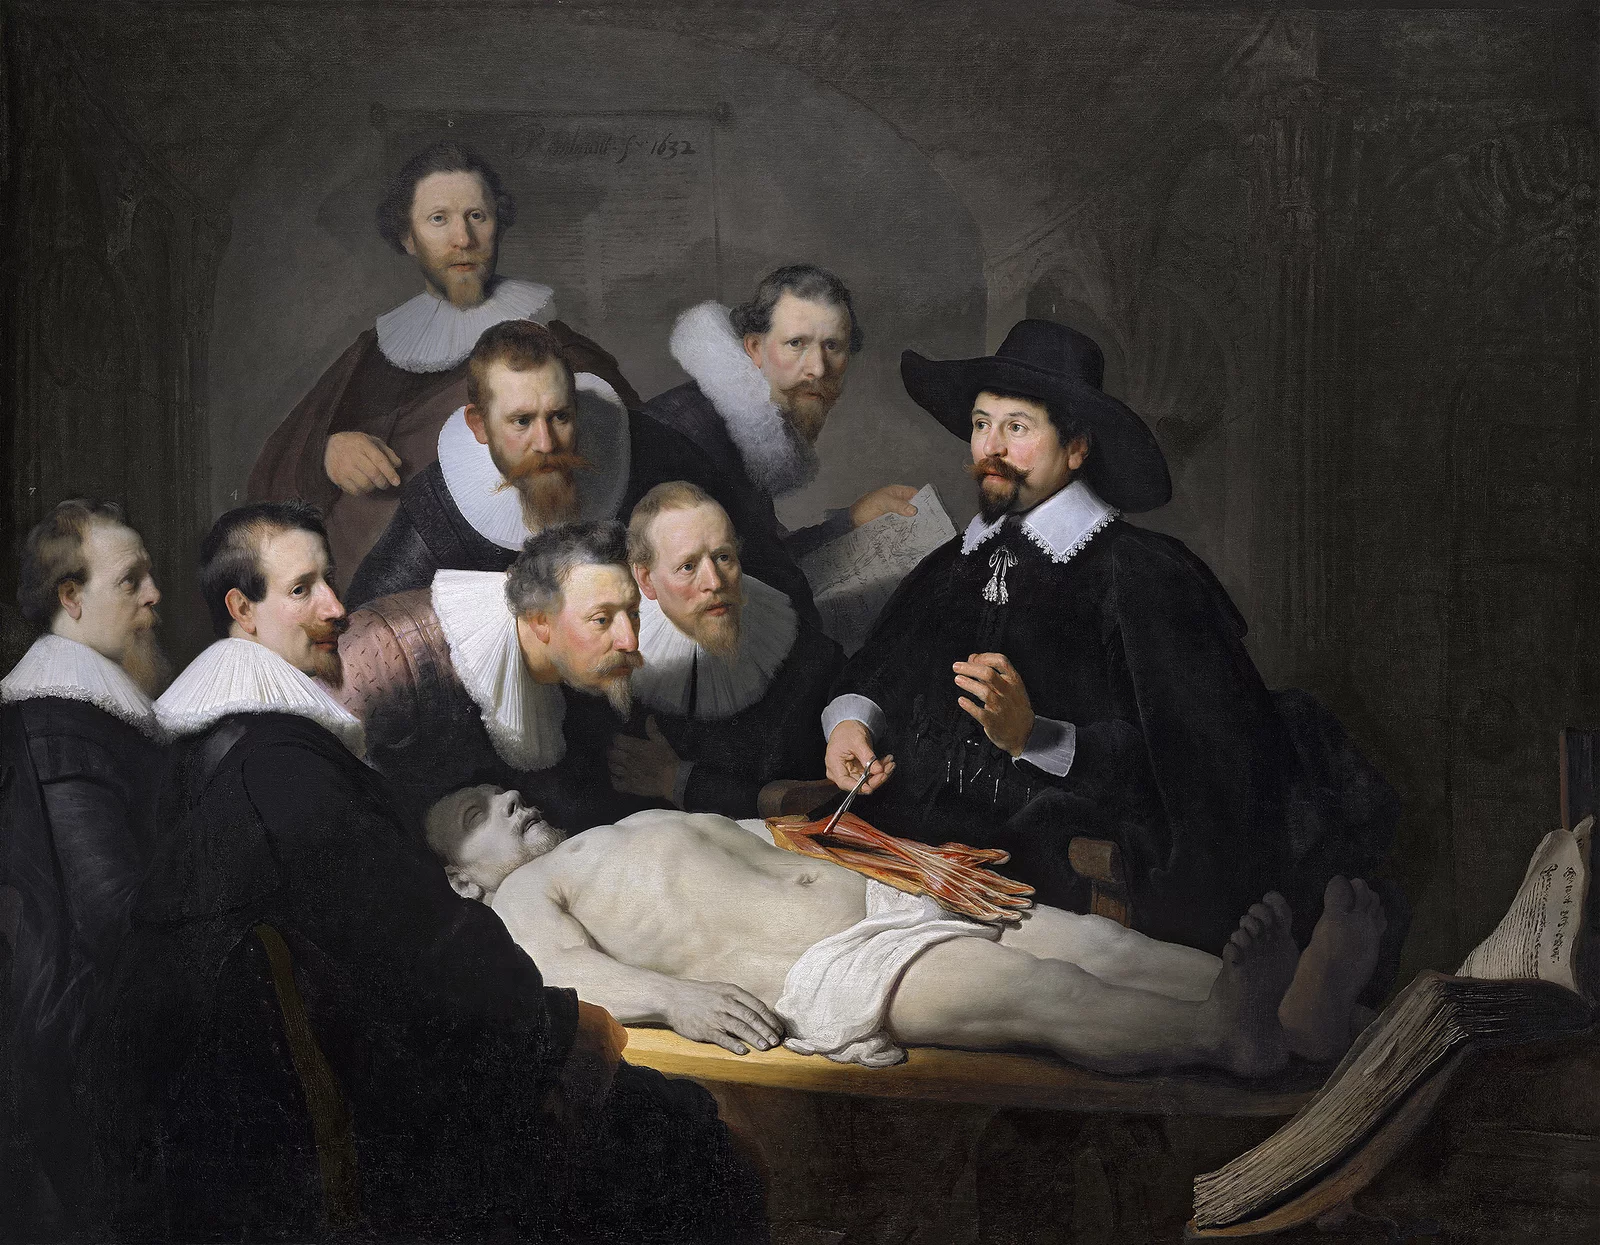 Rembrant's The Anatomy Lesson of Dr. Nicolaes Tulp Fine Art Images/Heritage Images/Getty Images